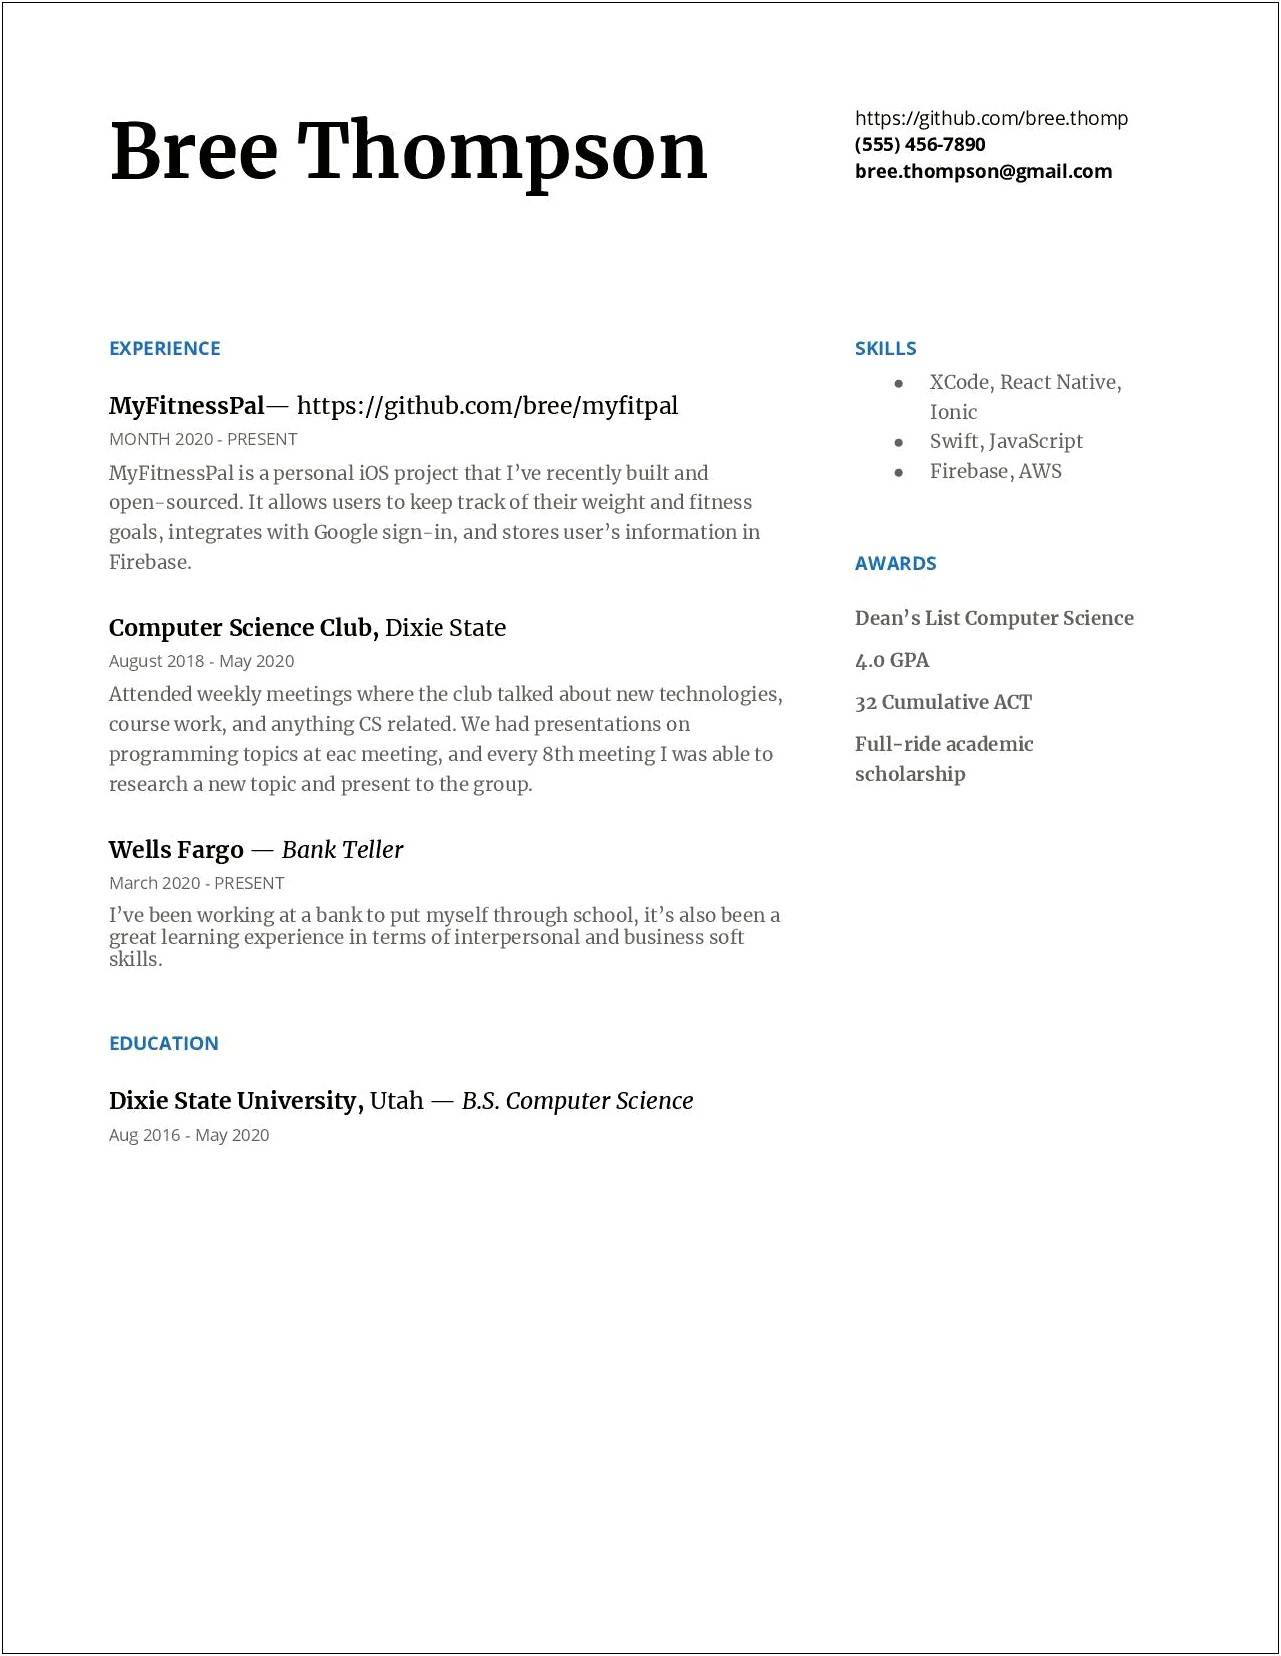 Sample Resume For Cse Students